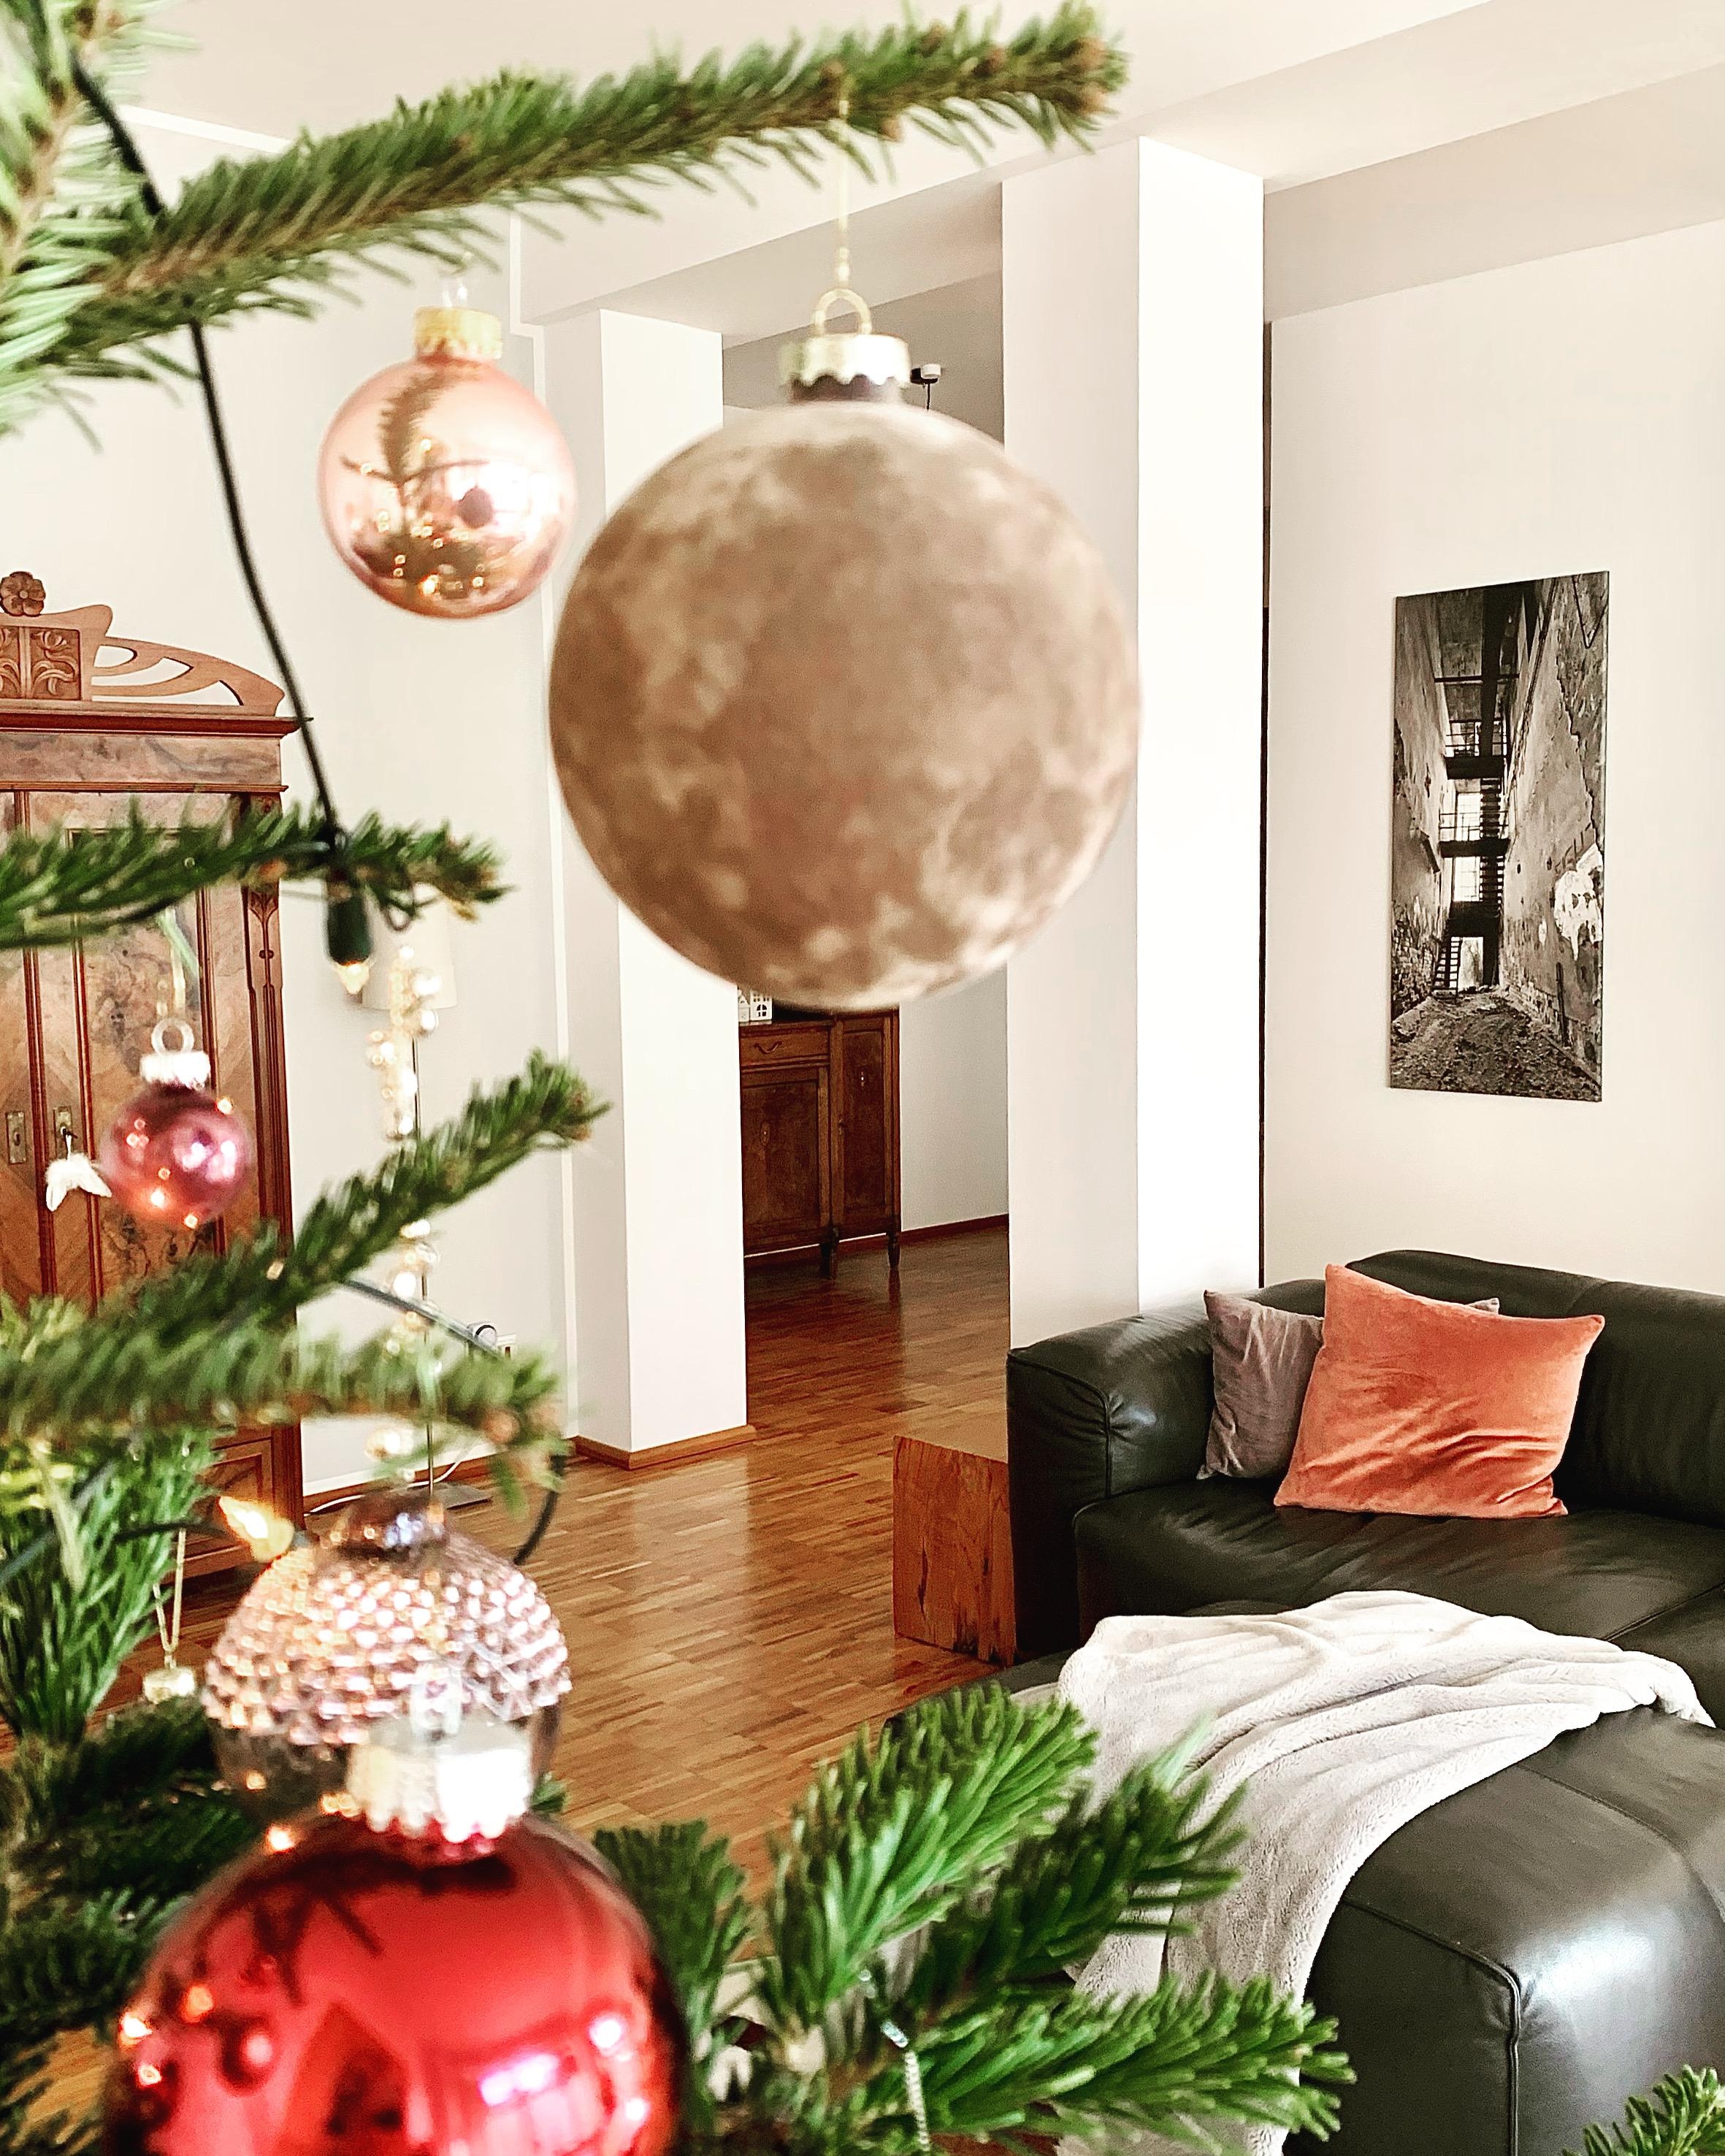 It’s beginning to look a lot like Christmas...
#wohnzimmer #livingroom #couch